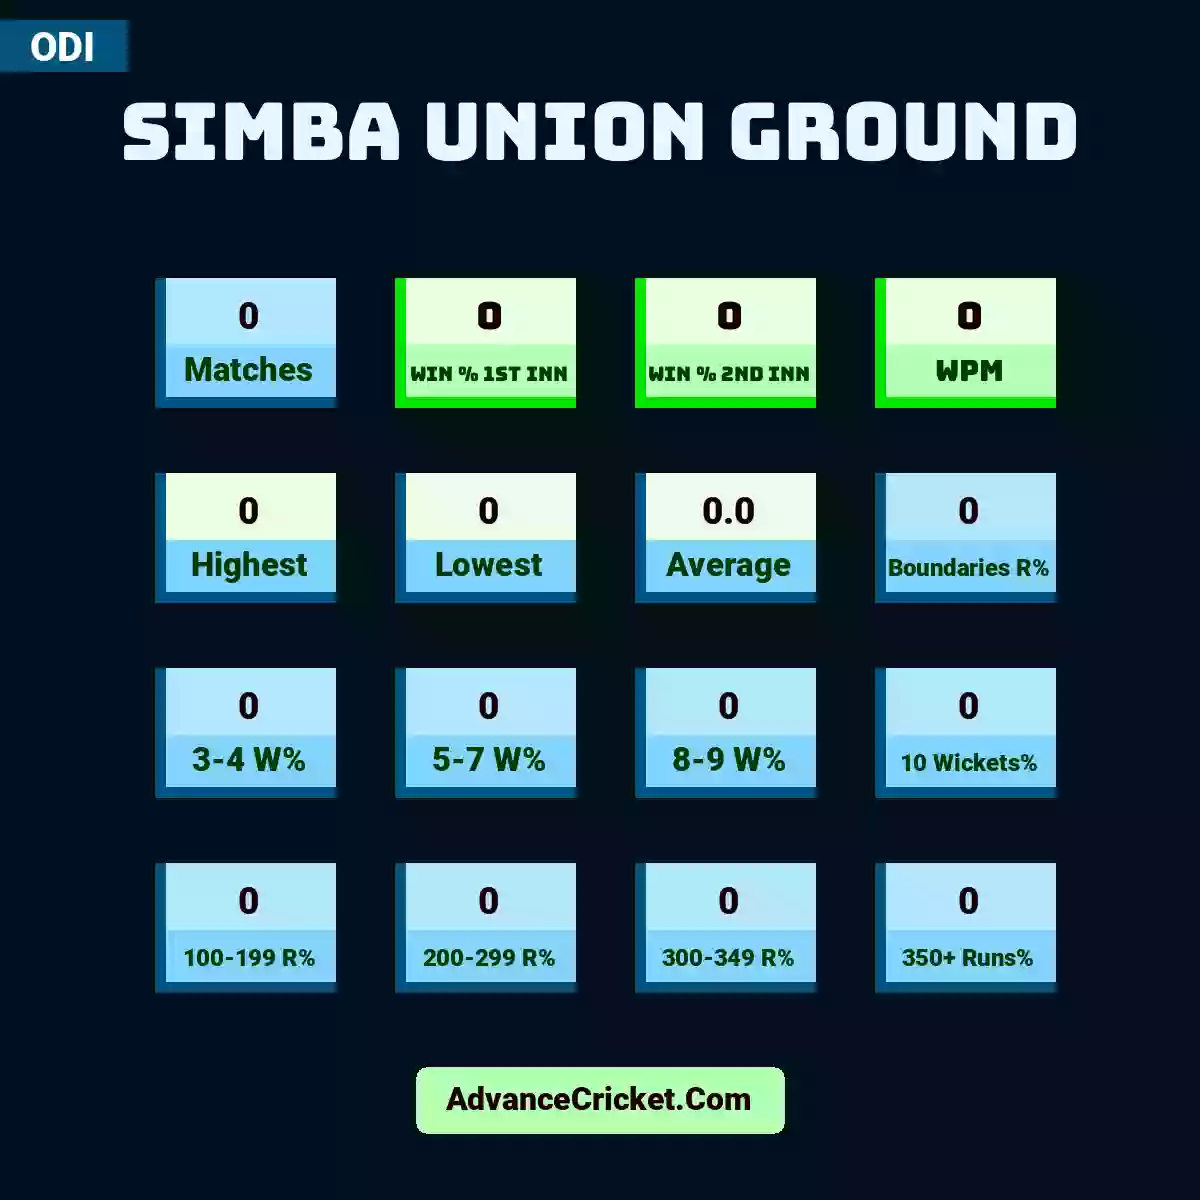 Image showing Simba Union Ground with Matches: 0, Win % 1st Inn: 0, Win % 2nd Inn: 0, WPM: 0, Highest: 0, Lowest: 0, Average: 0.0, Boundaries R%: 0, 3-4 W%: 0, 5-7 W%: 0, 8-9 W%: 0, 10 Wickets%: 0, 100-199 R%: 0, 200-299 R%: 0, 300-349 R%: 0, 350+ Runs%: 0.